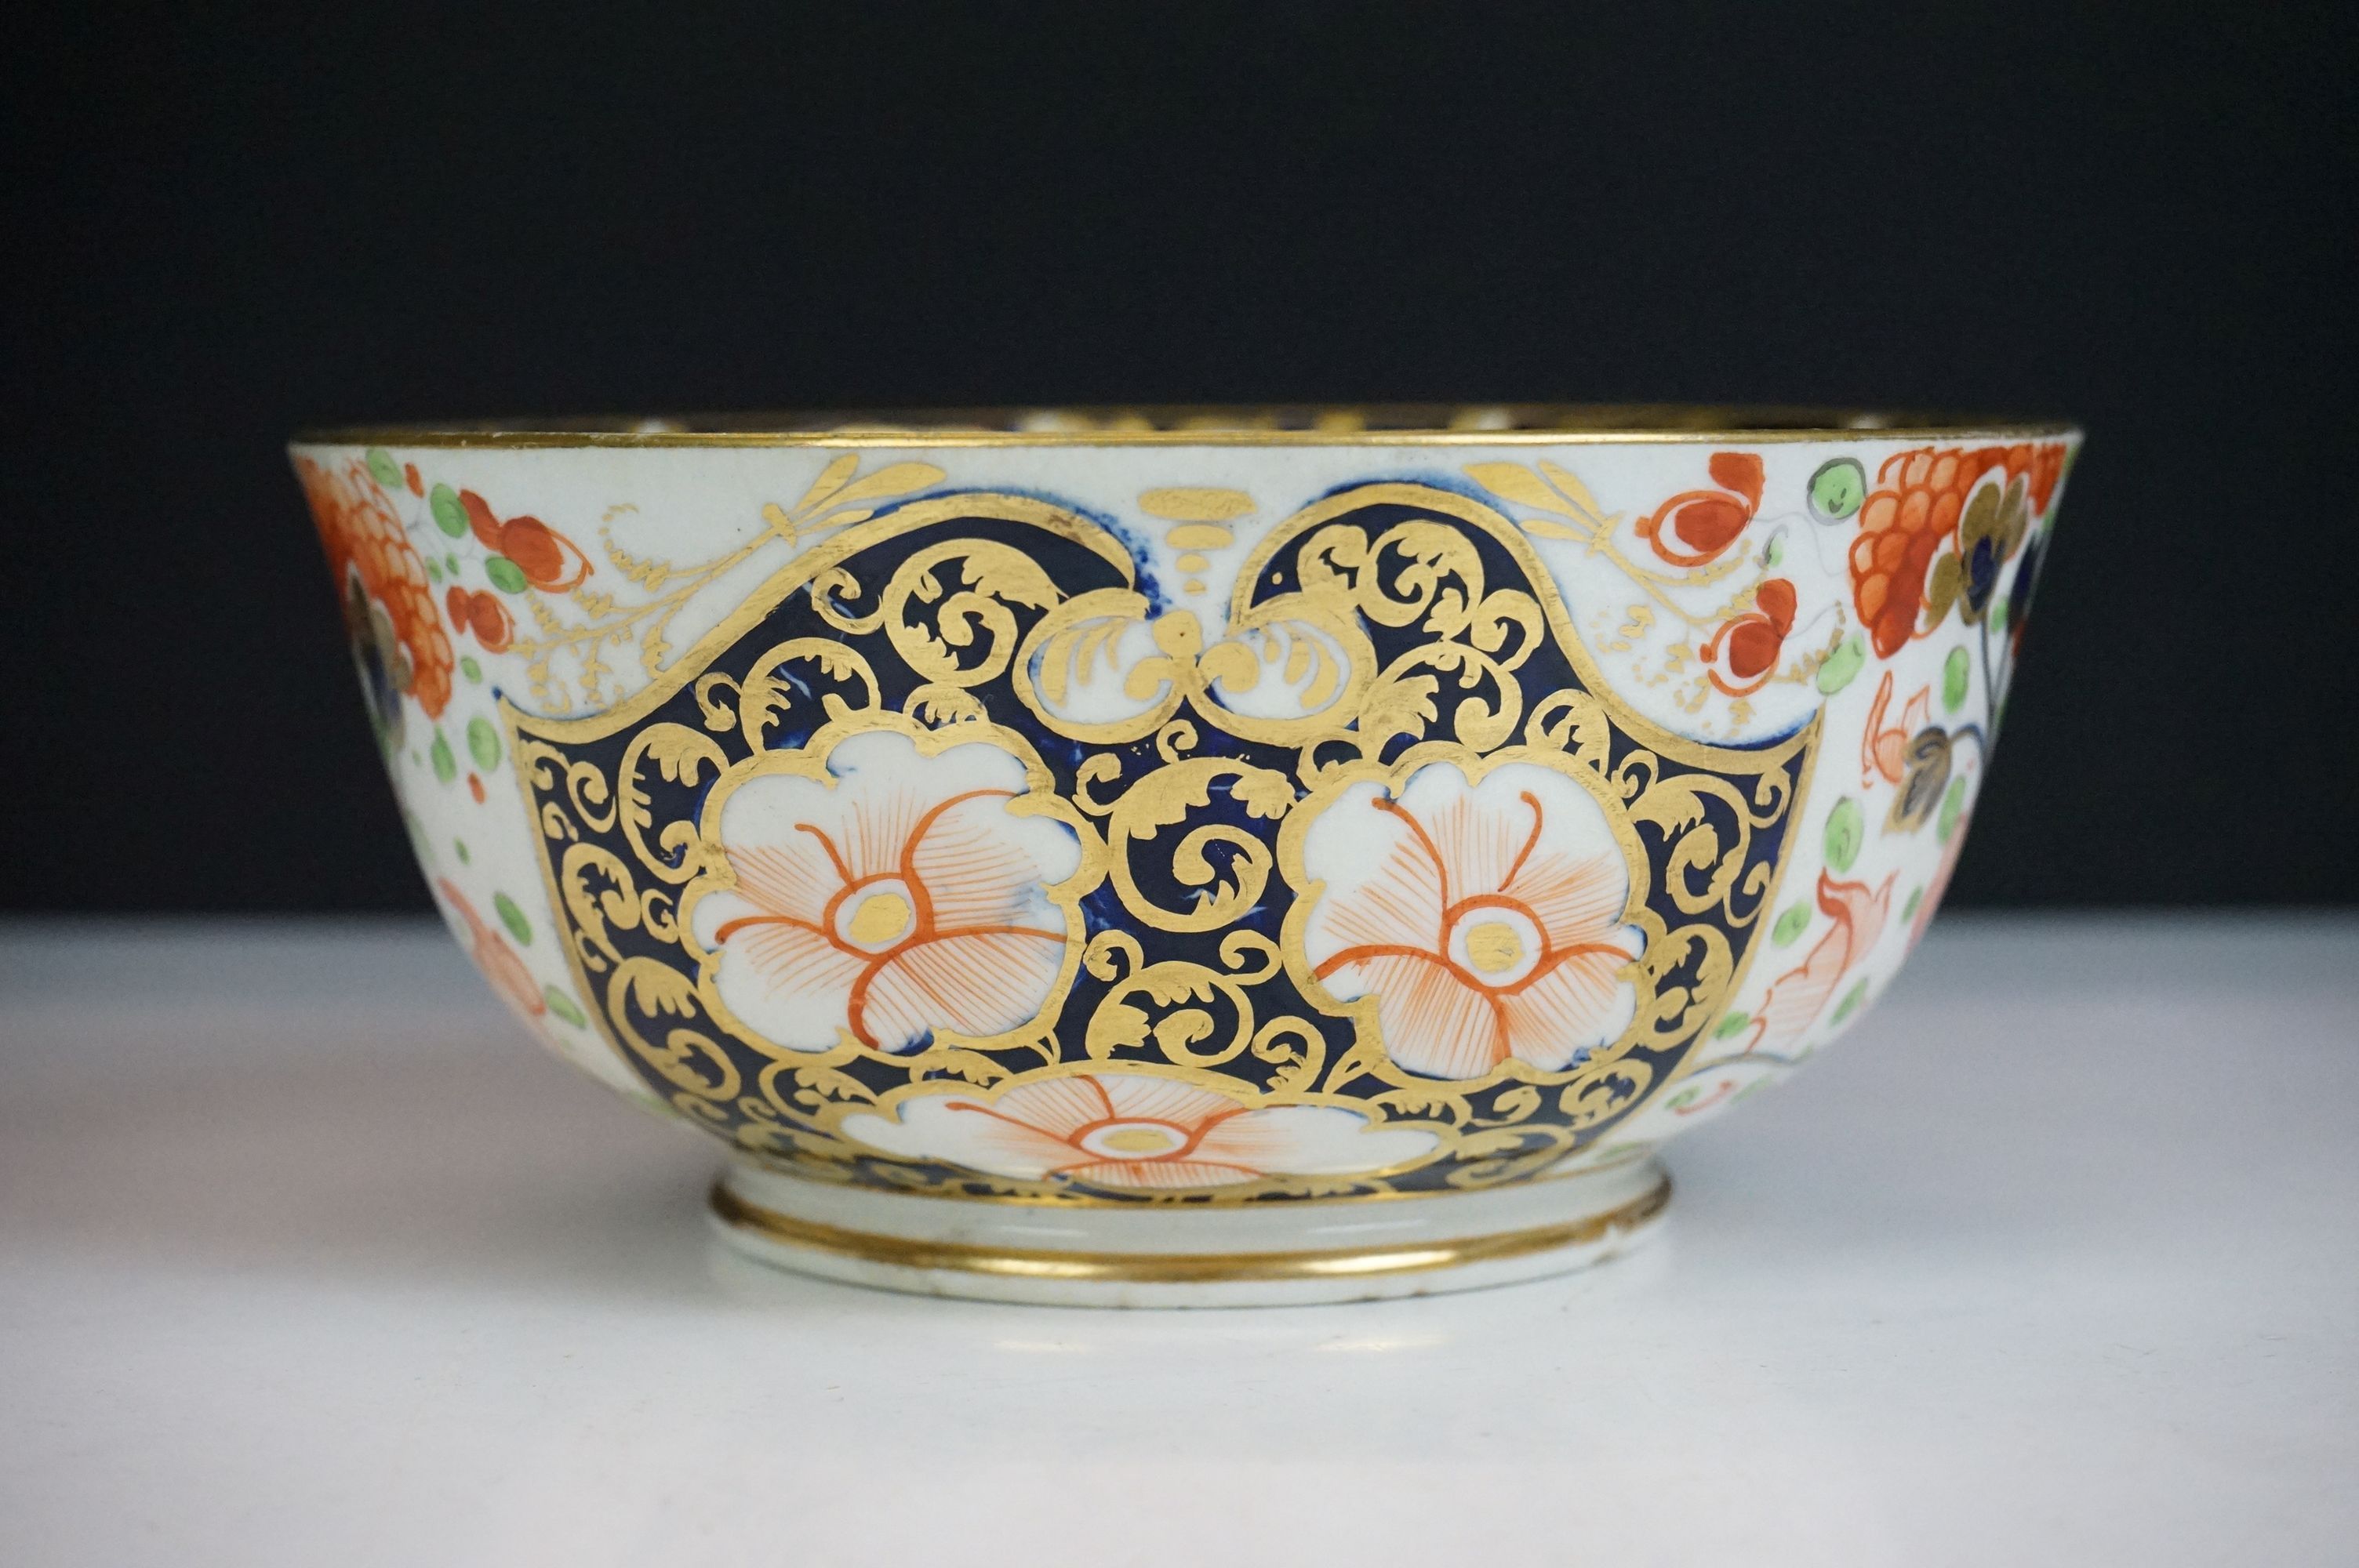 Early 19th century Crown Derby Imari pattern ceramics to include a small tureen & cover, teacups, - Image 11 of 24